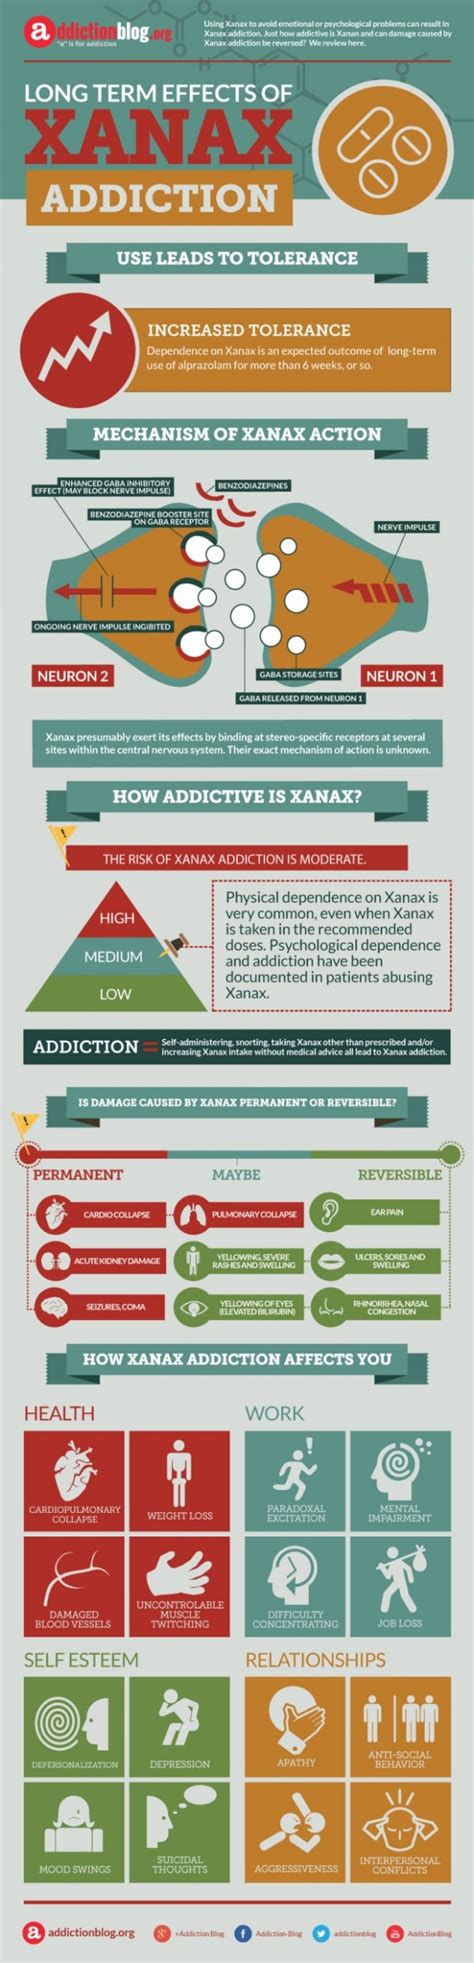 Xanax Addiction Symptoms How To Tell If Youre Hooked Article Cats